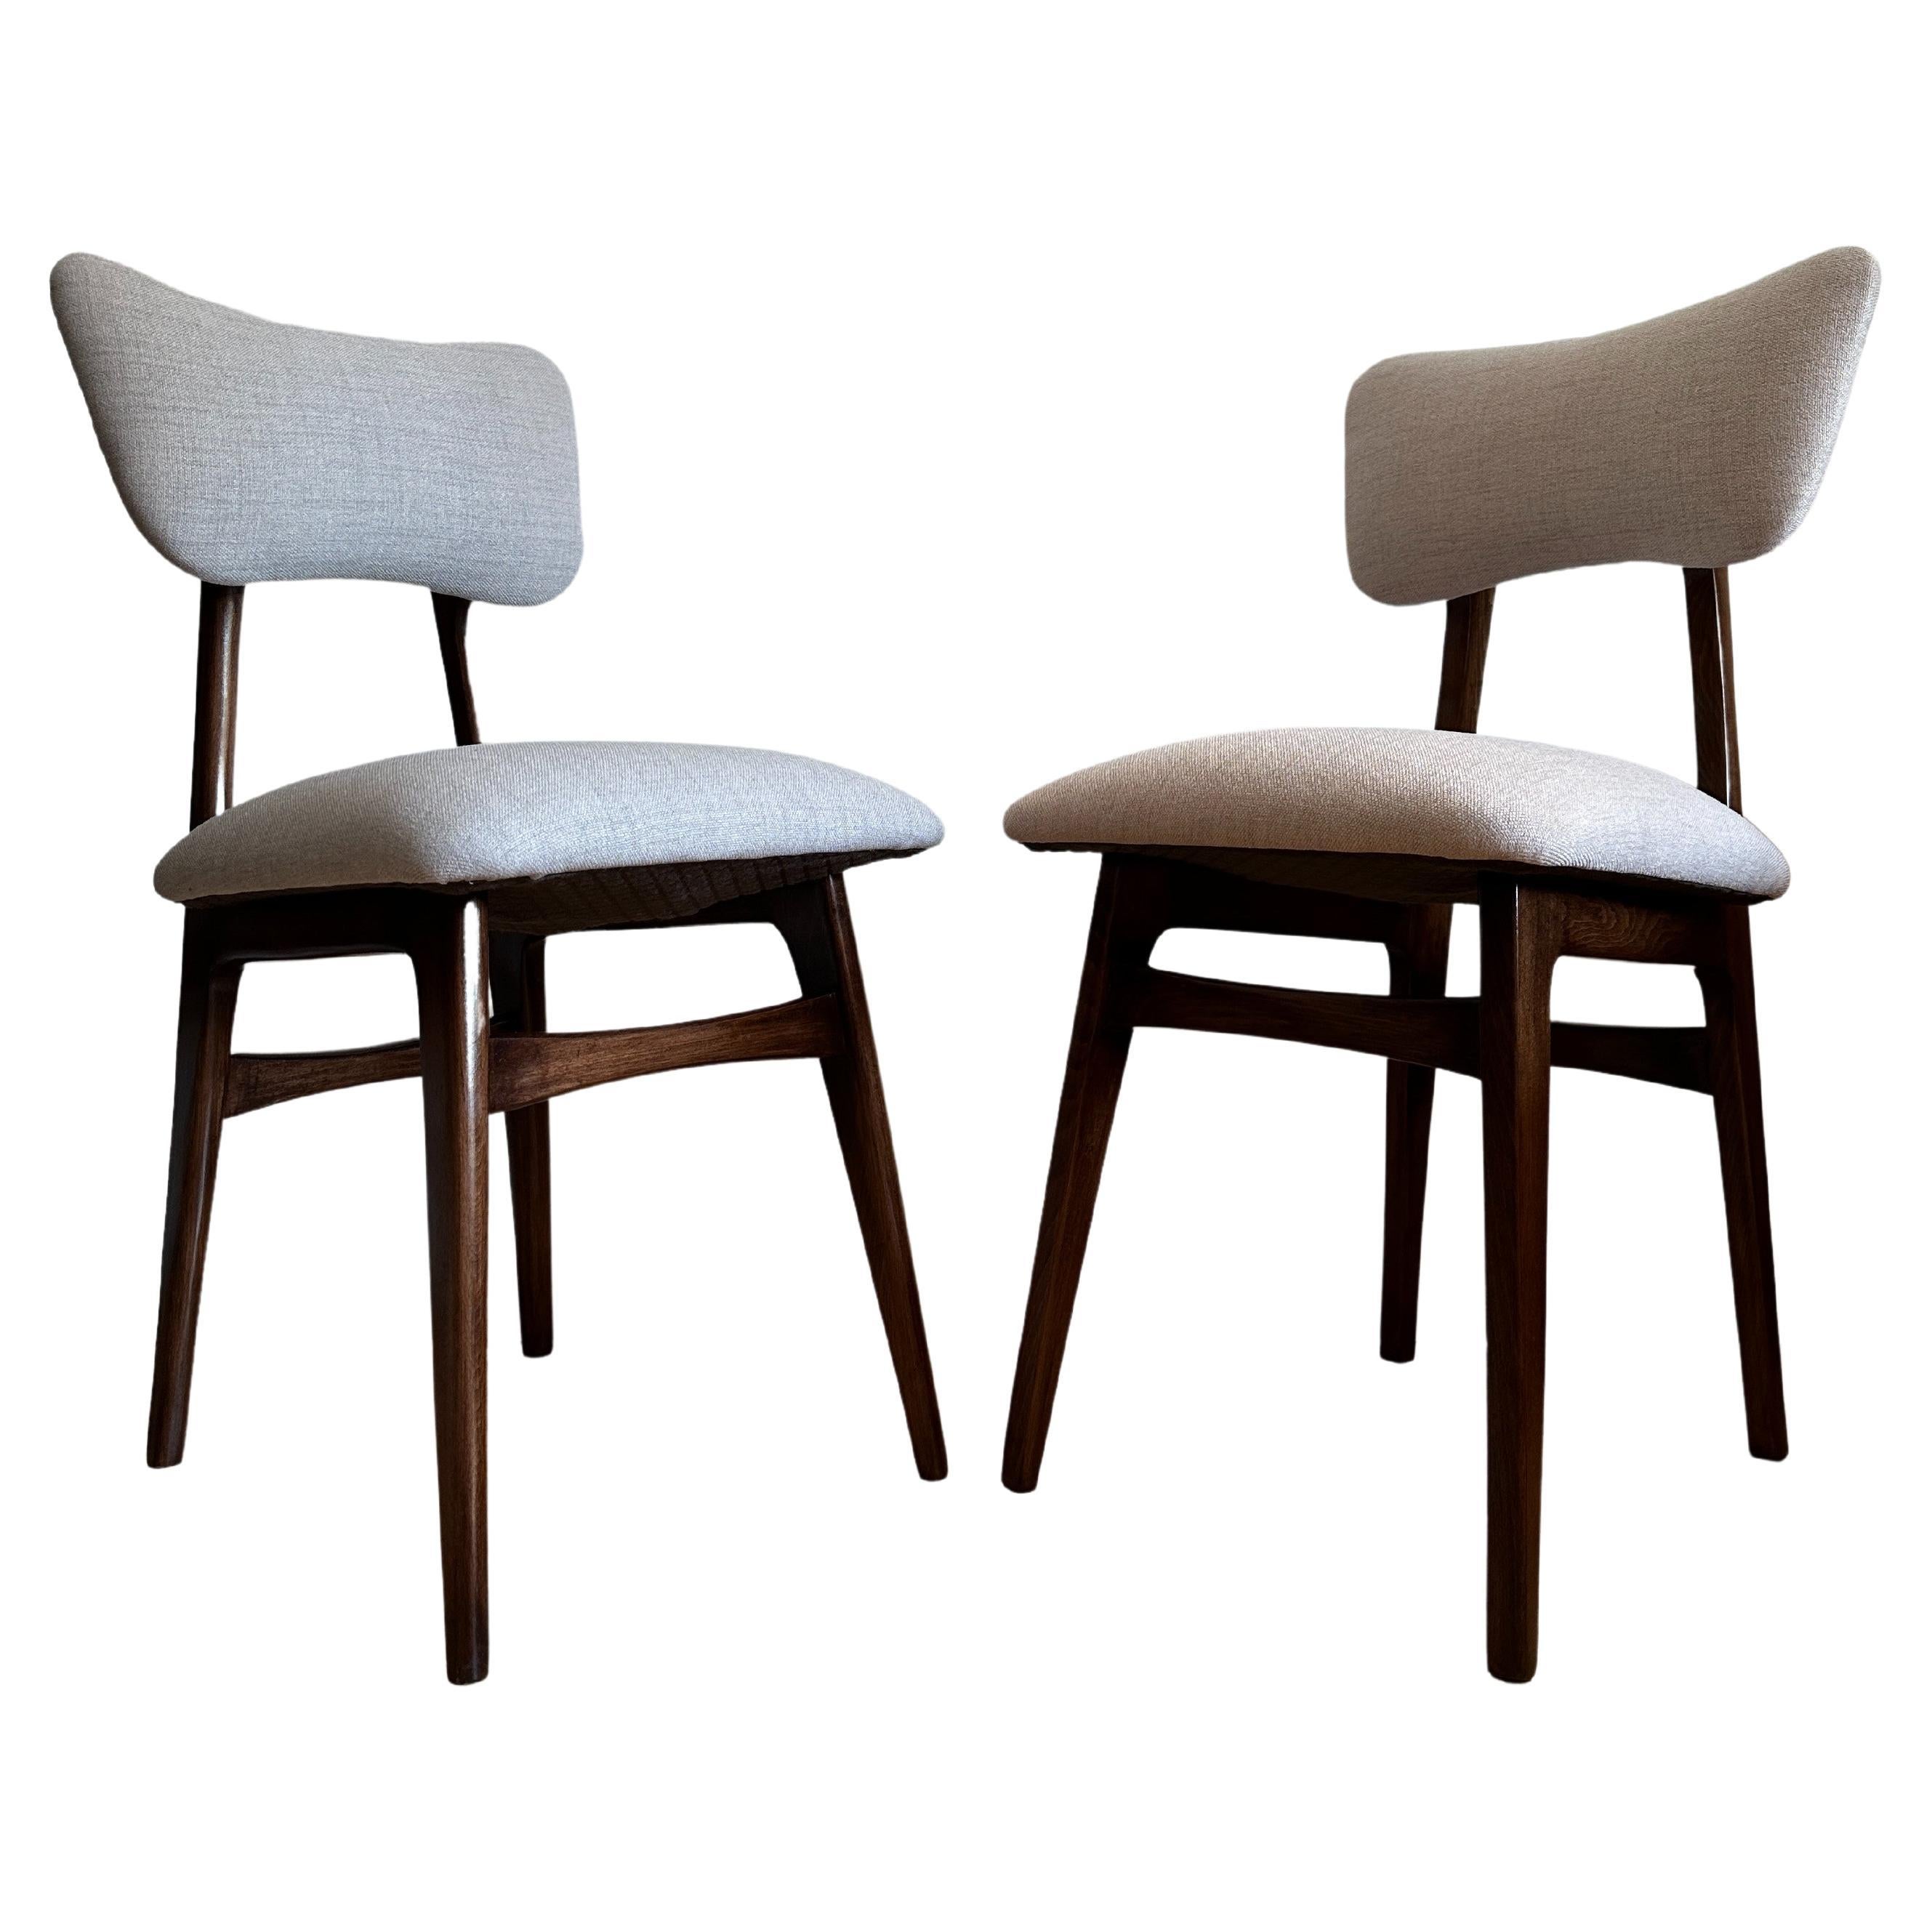 Set of 2 Midcentury Beige and Grey Dining Chairs, Europe, 1960s